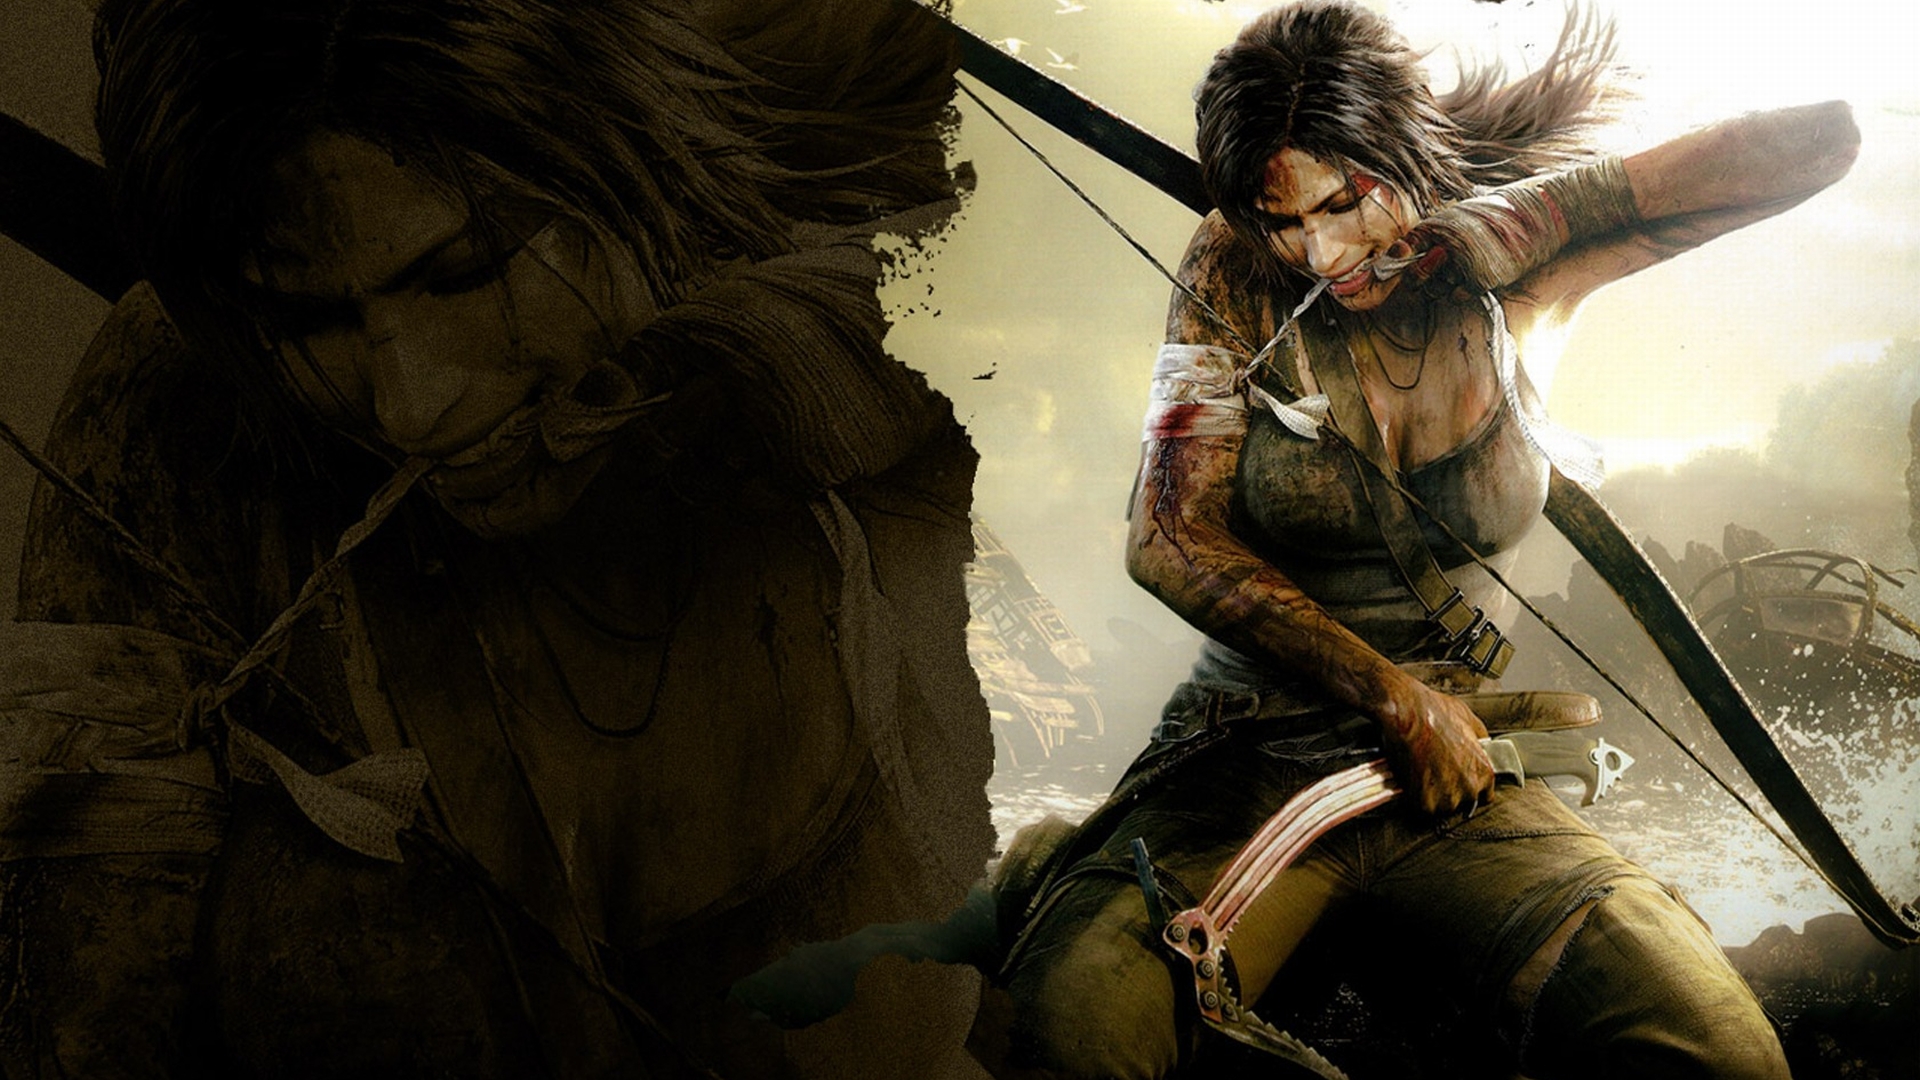 Tomb Raider Full HD Wallpaper and Background Image | 1920x1080 | ID:144836